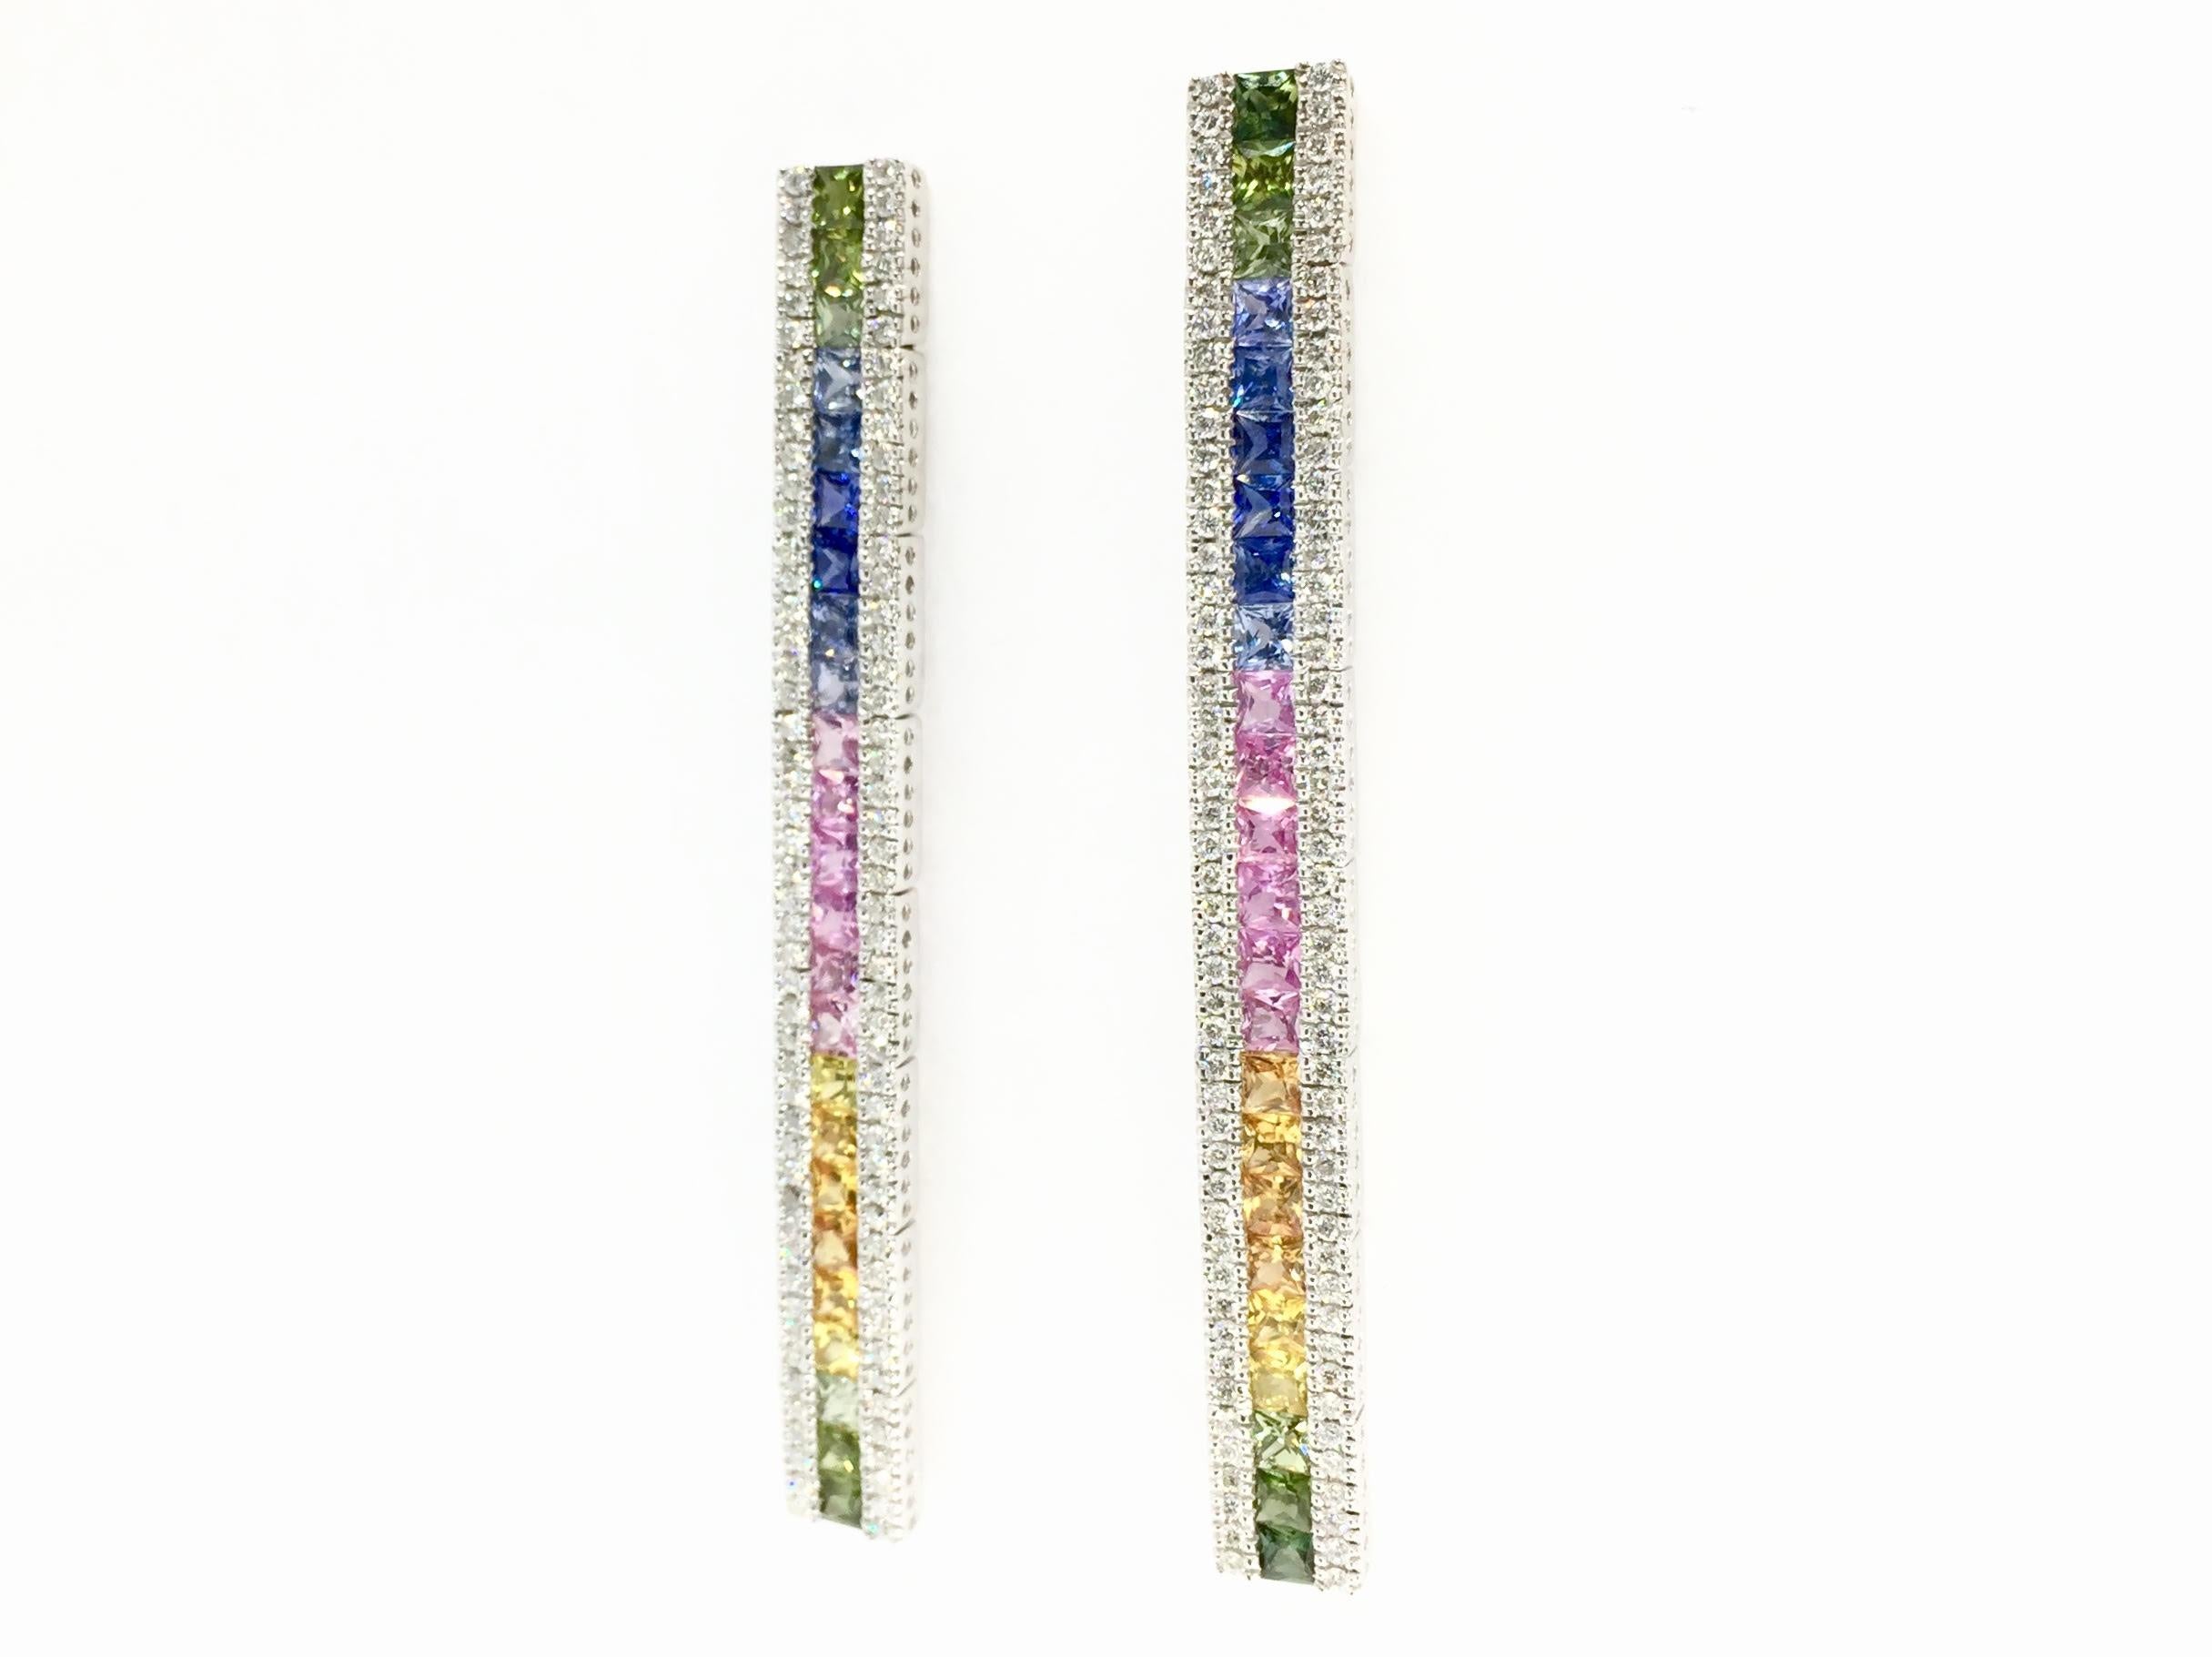 Colorfully vivid sapphire and diamond long drop earrings made in 14 karat white gold. Earrings feature approximately 1.20 carats total weight of round brilliant diamonds at approximately G color, SI1 clarity. Princess cut sapphires are arranged in a